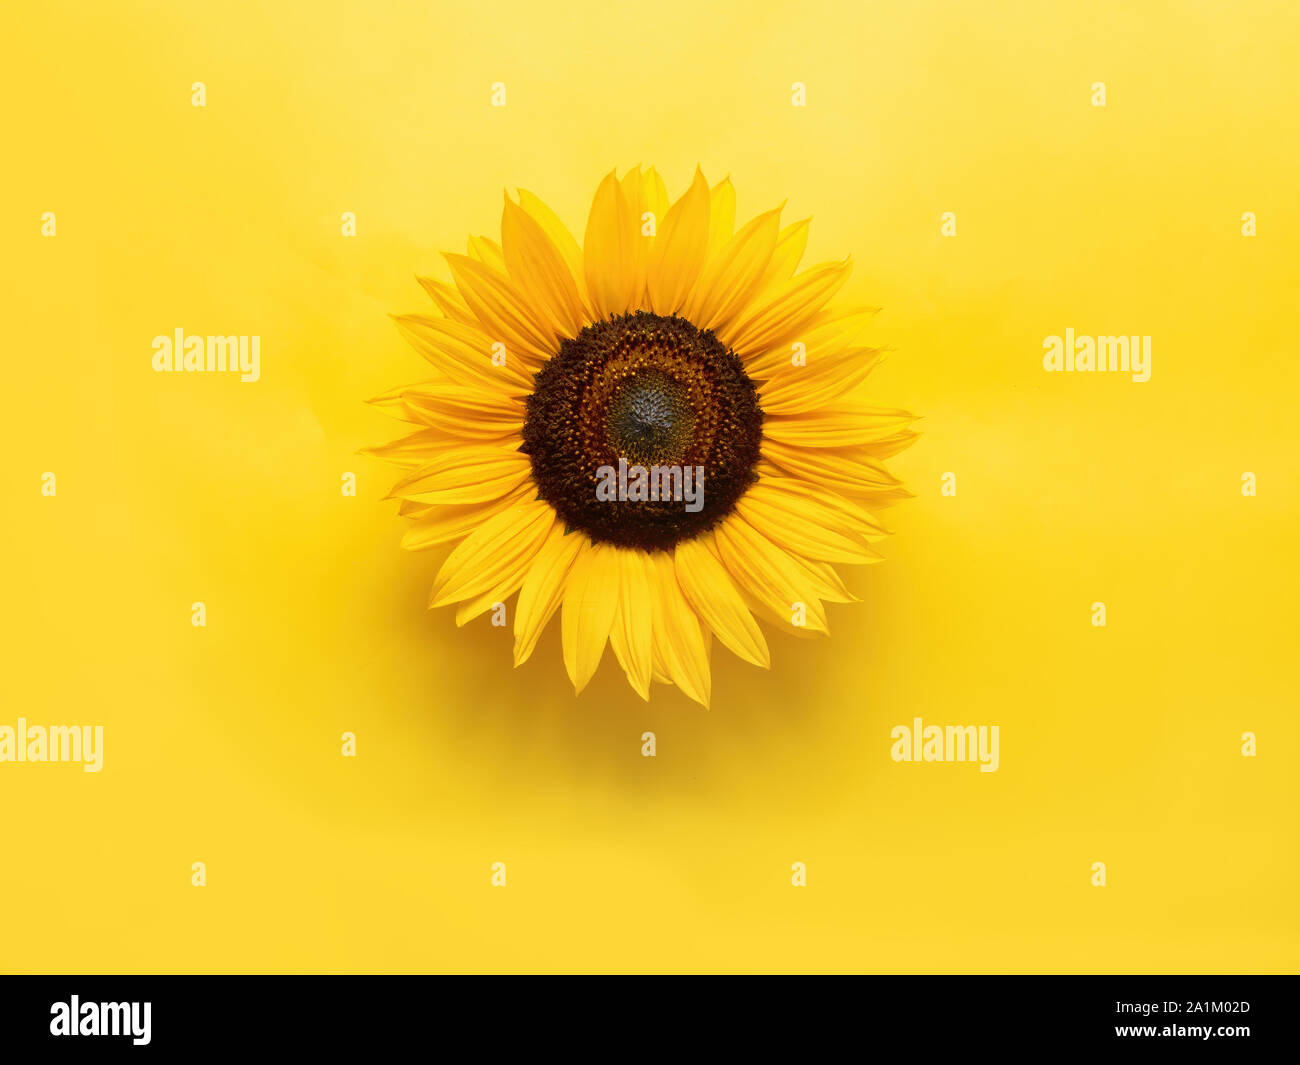 Sunflower flower on yellow with copyspace. Looks 3d. Stock Photo